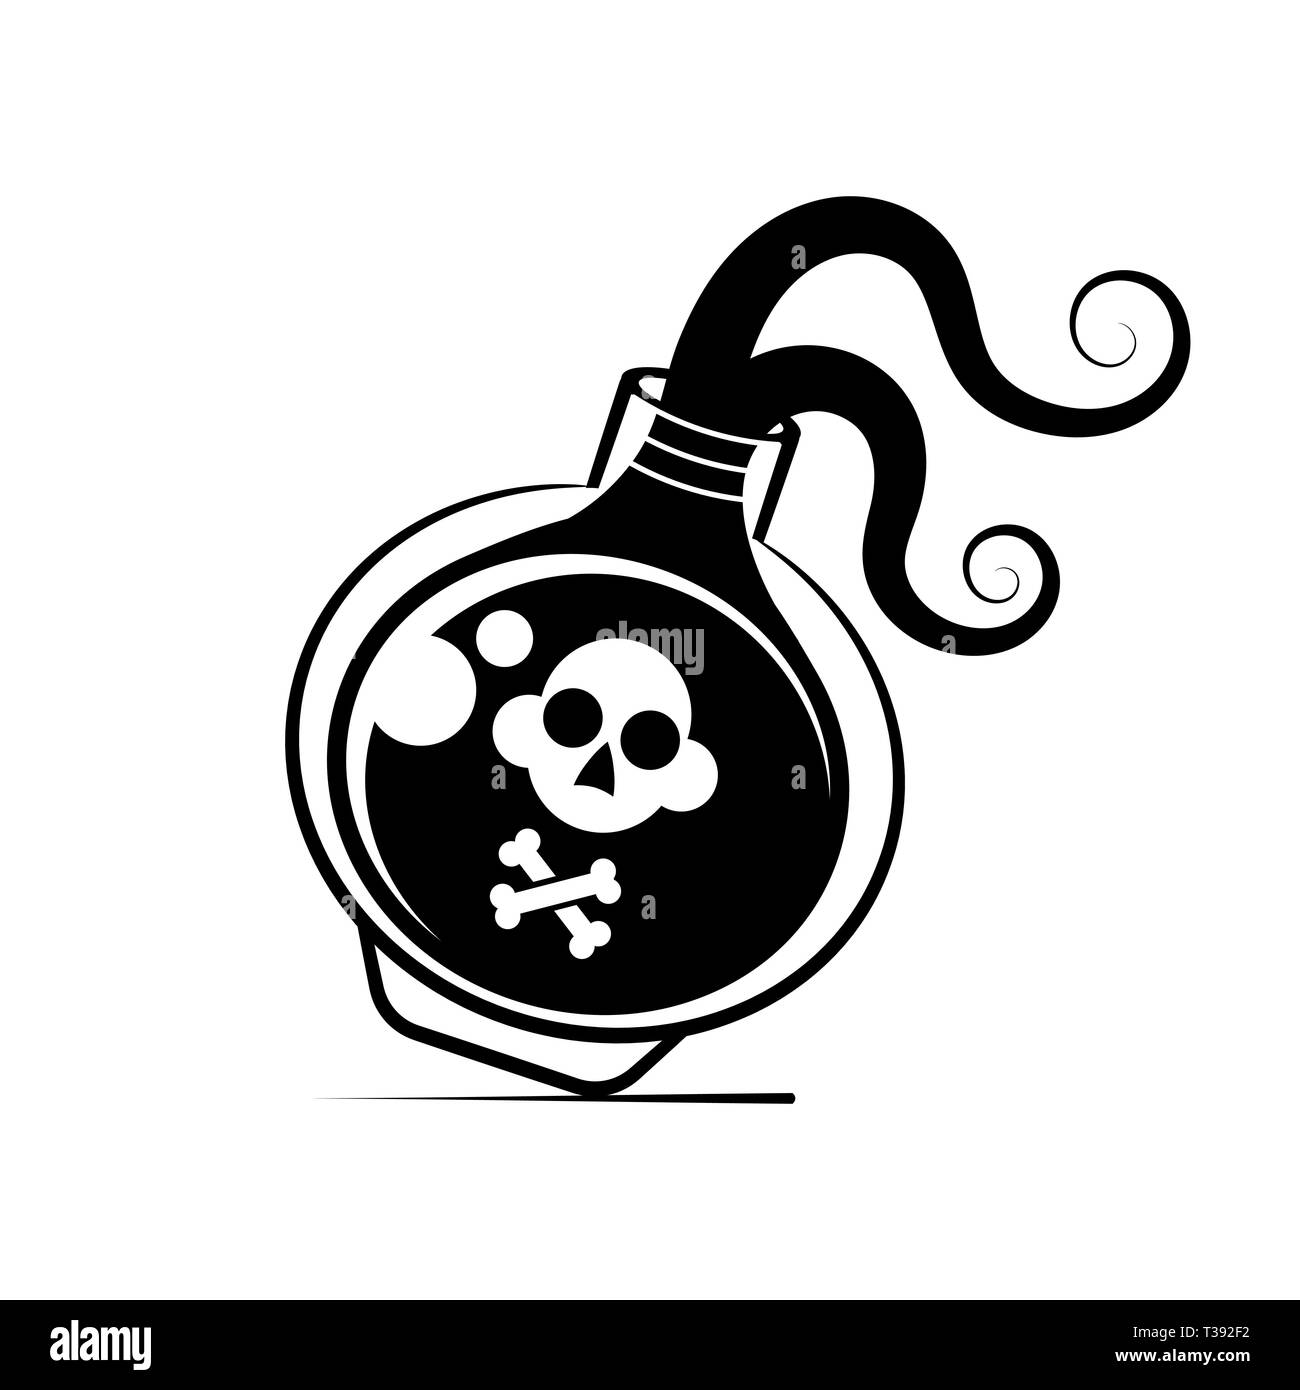 Poison Illustration Traditional Tattoo Flash Stock Vector Royalty Free  795416173  Shutterstock